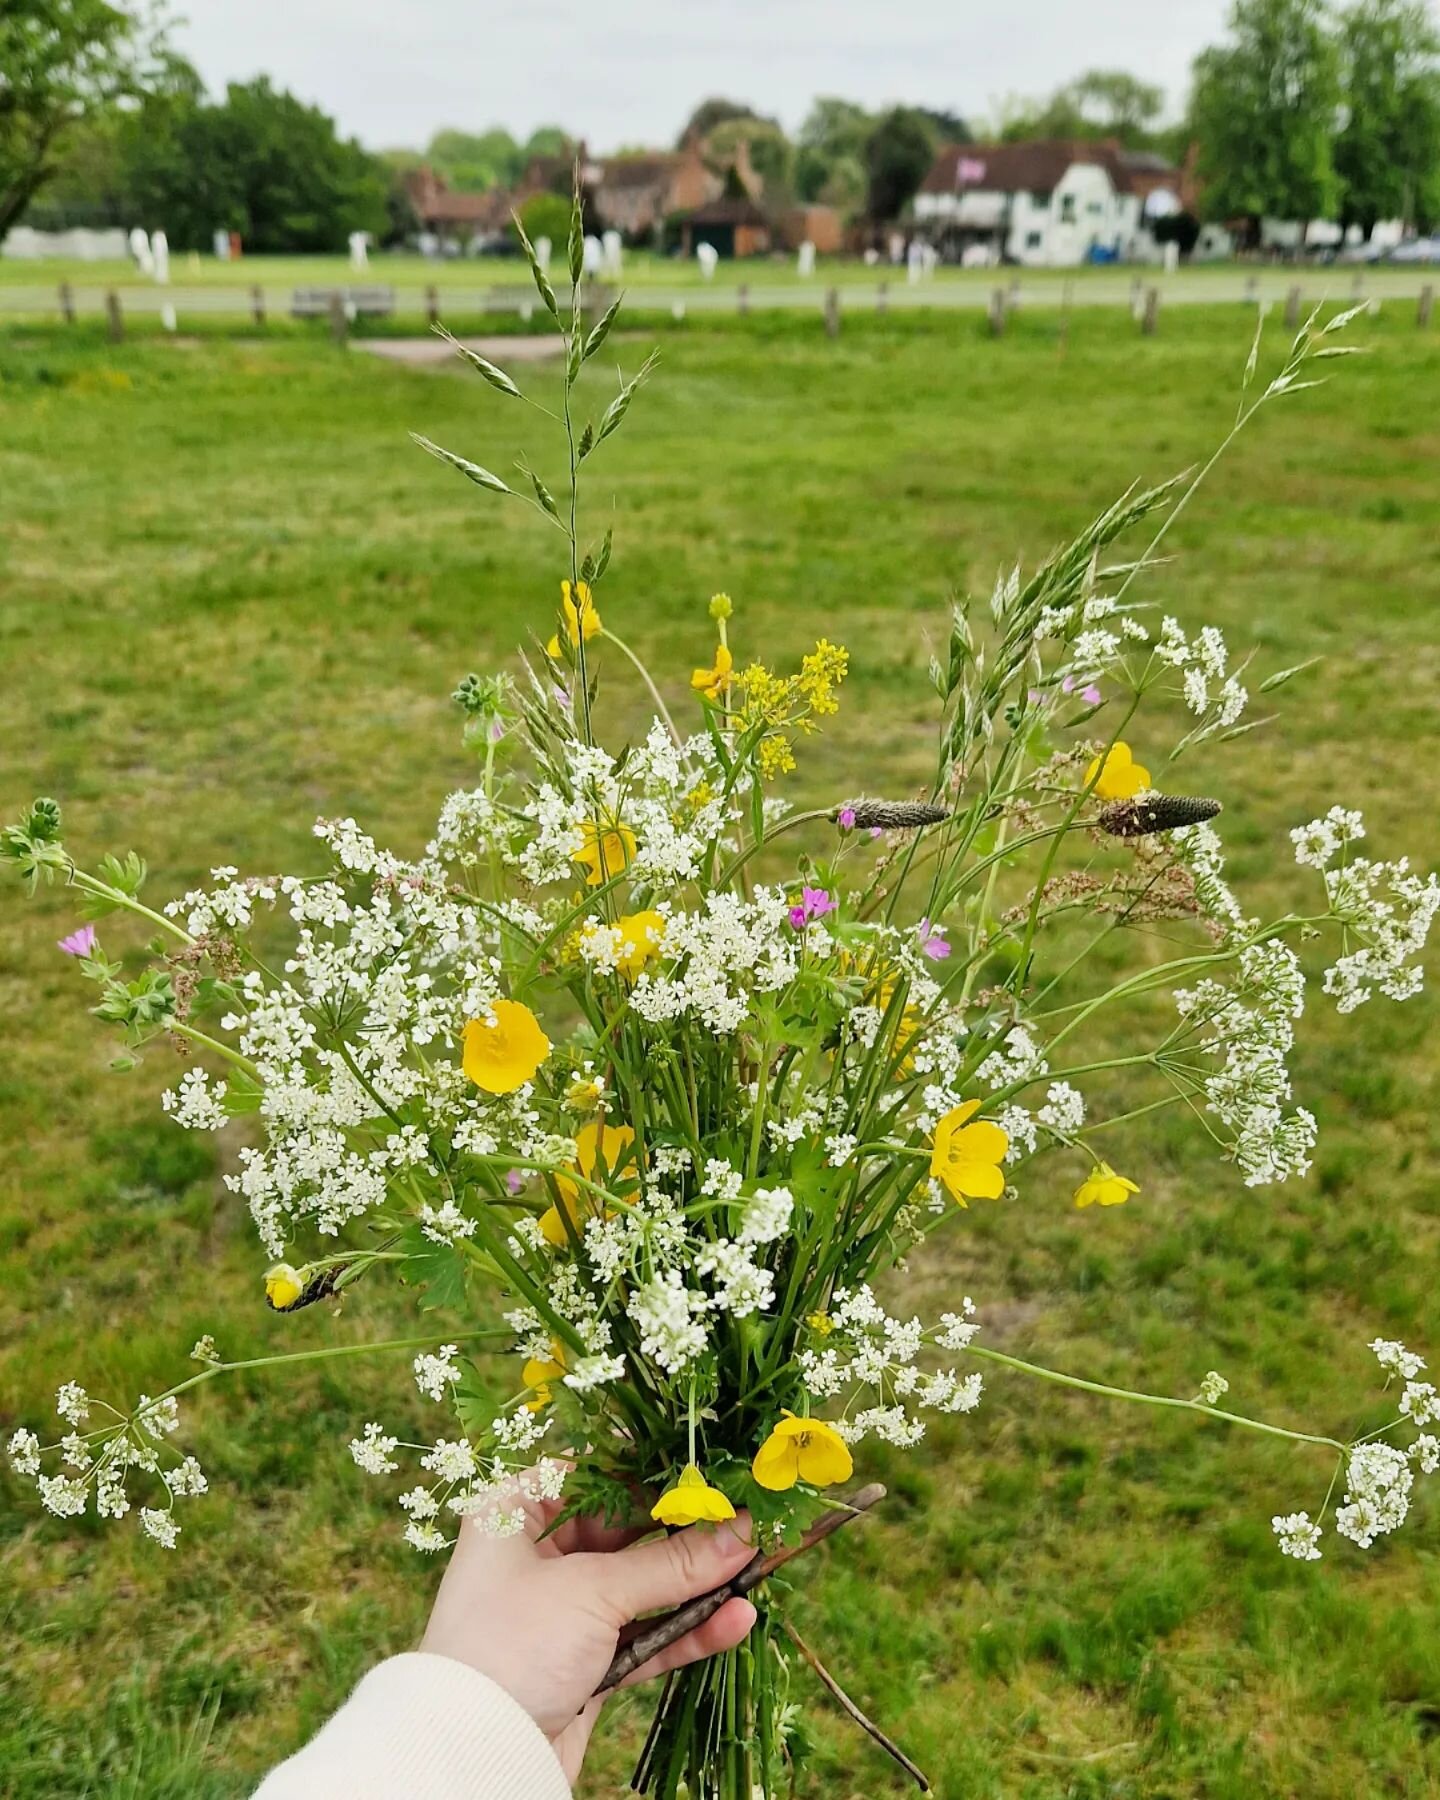 Happy Surrey Day 🌱

Spent the afternoon gathering wildflowers, watching the cricket, noshing on incredible food and chatting to local producers @ripleyfarmersmarket with my family today. 

Could not love this beautiful county more. 

💛

#surreyday 